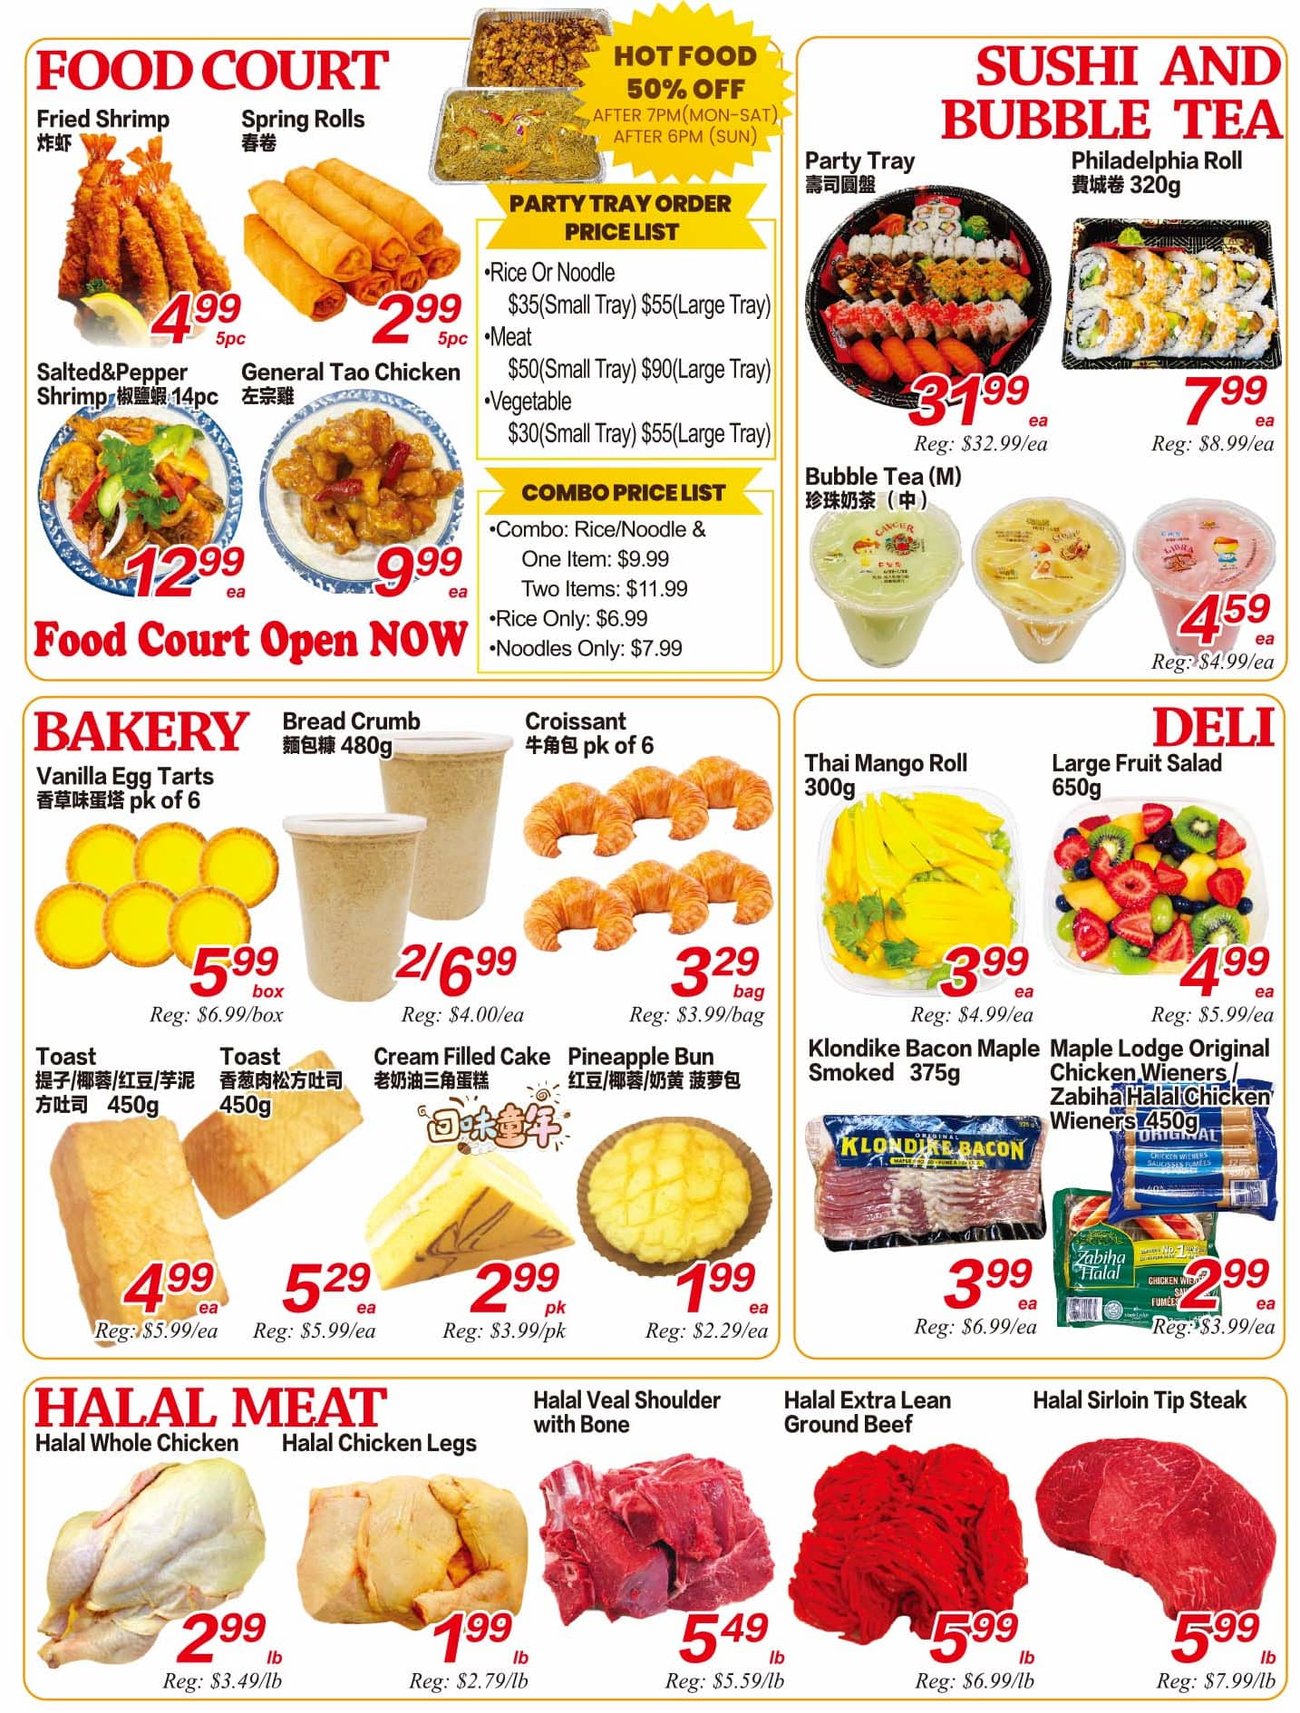 Superking Supermarket - London - Weekly Flyer Specials - Page 2